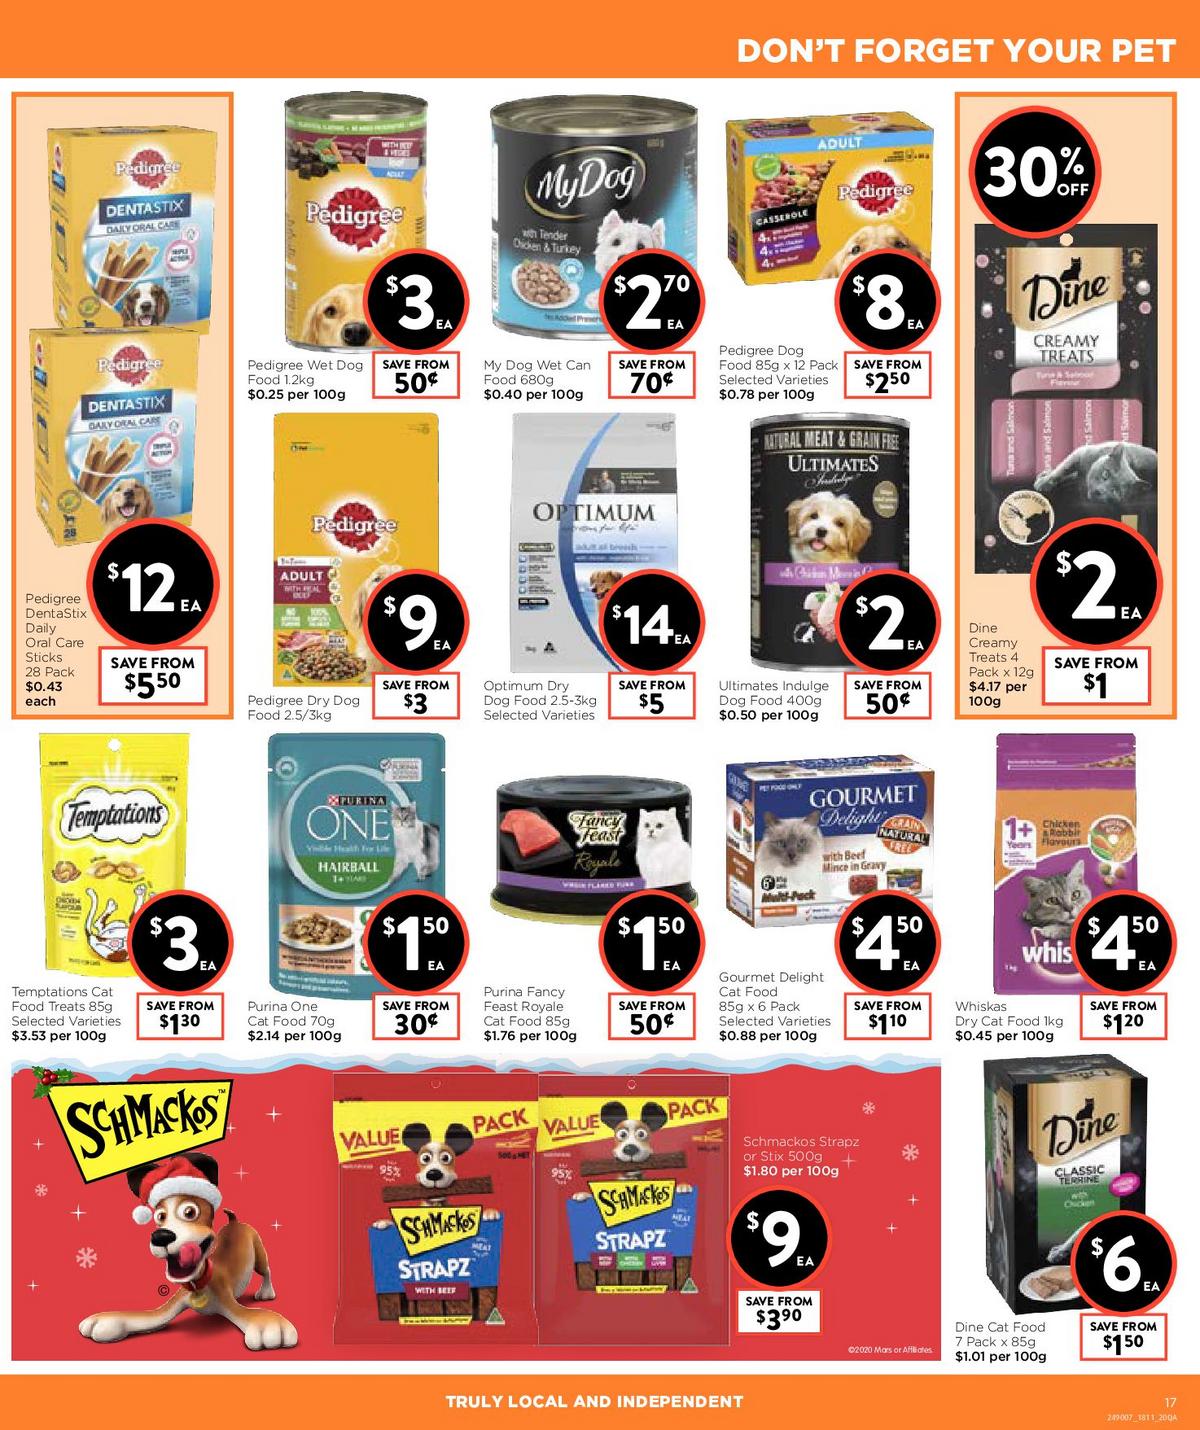 FoodWorks Supermarket Catalogues from 18 November